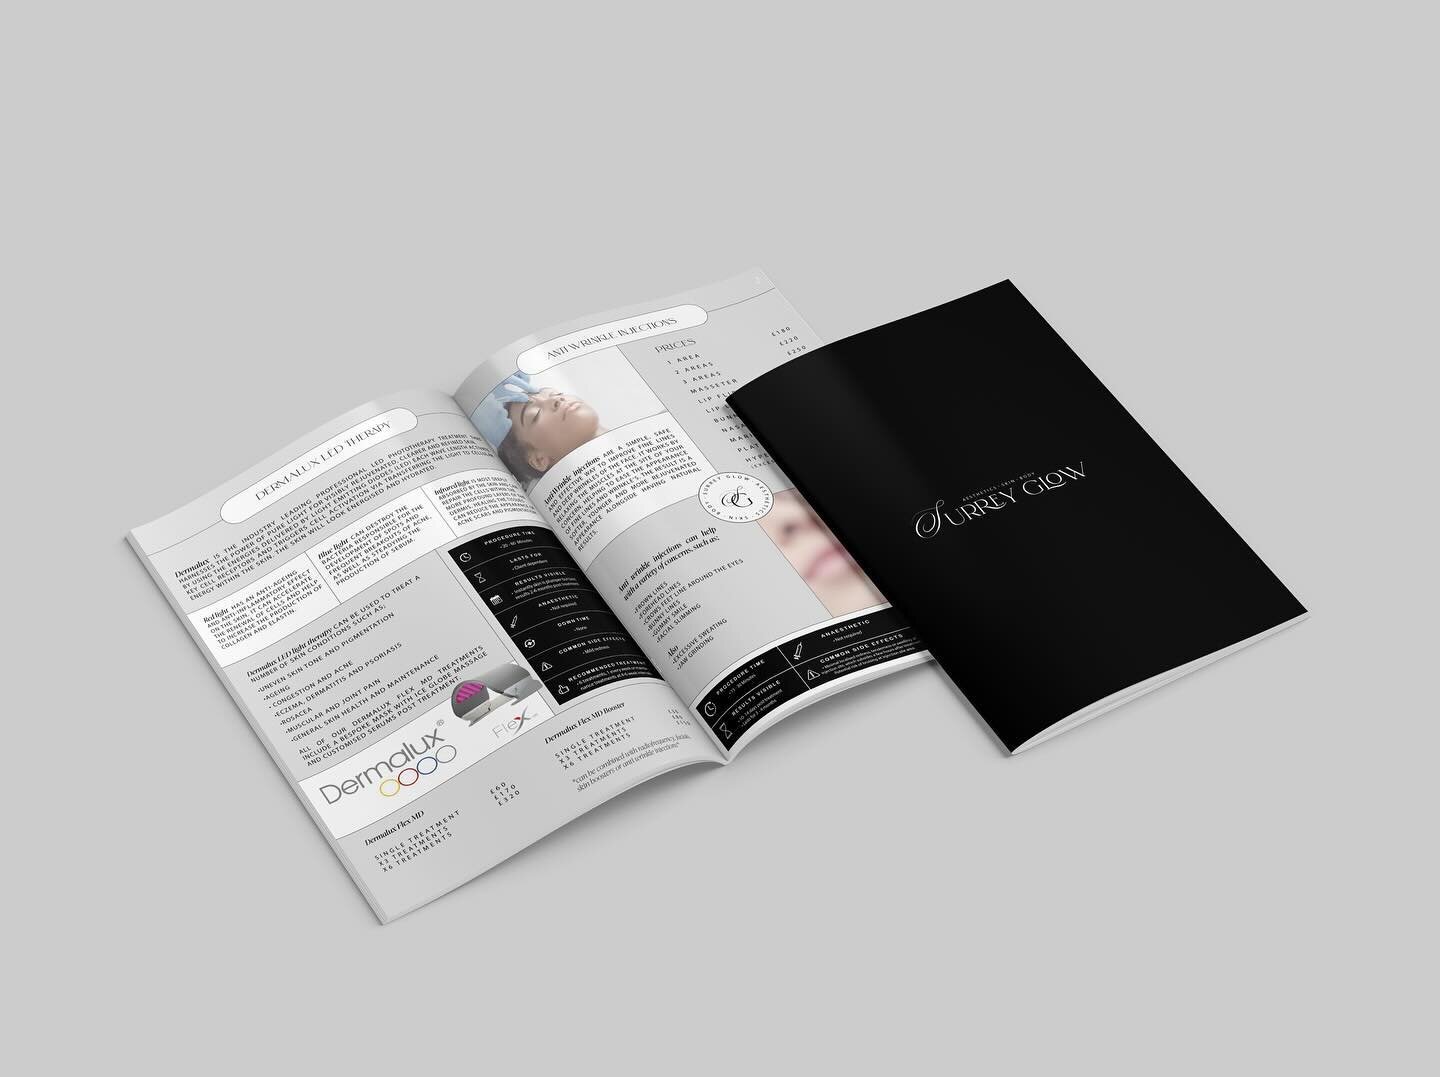 Digital brochure design completed recently for my client at Surrey Glow 🌟📖 The perfect way to get information/prices to your clients online 👏🏻

Ideal for; 
Training manuals
Treatment menus 
Information brochures
E-Books
+ More 

| studiokcd.co.uk